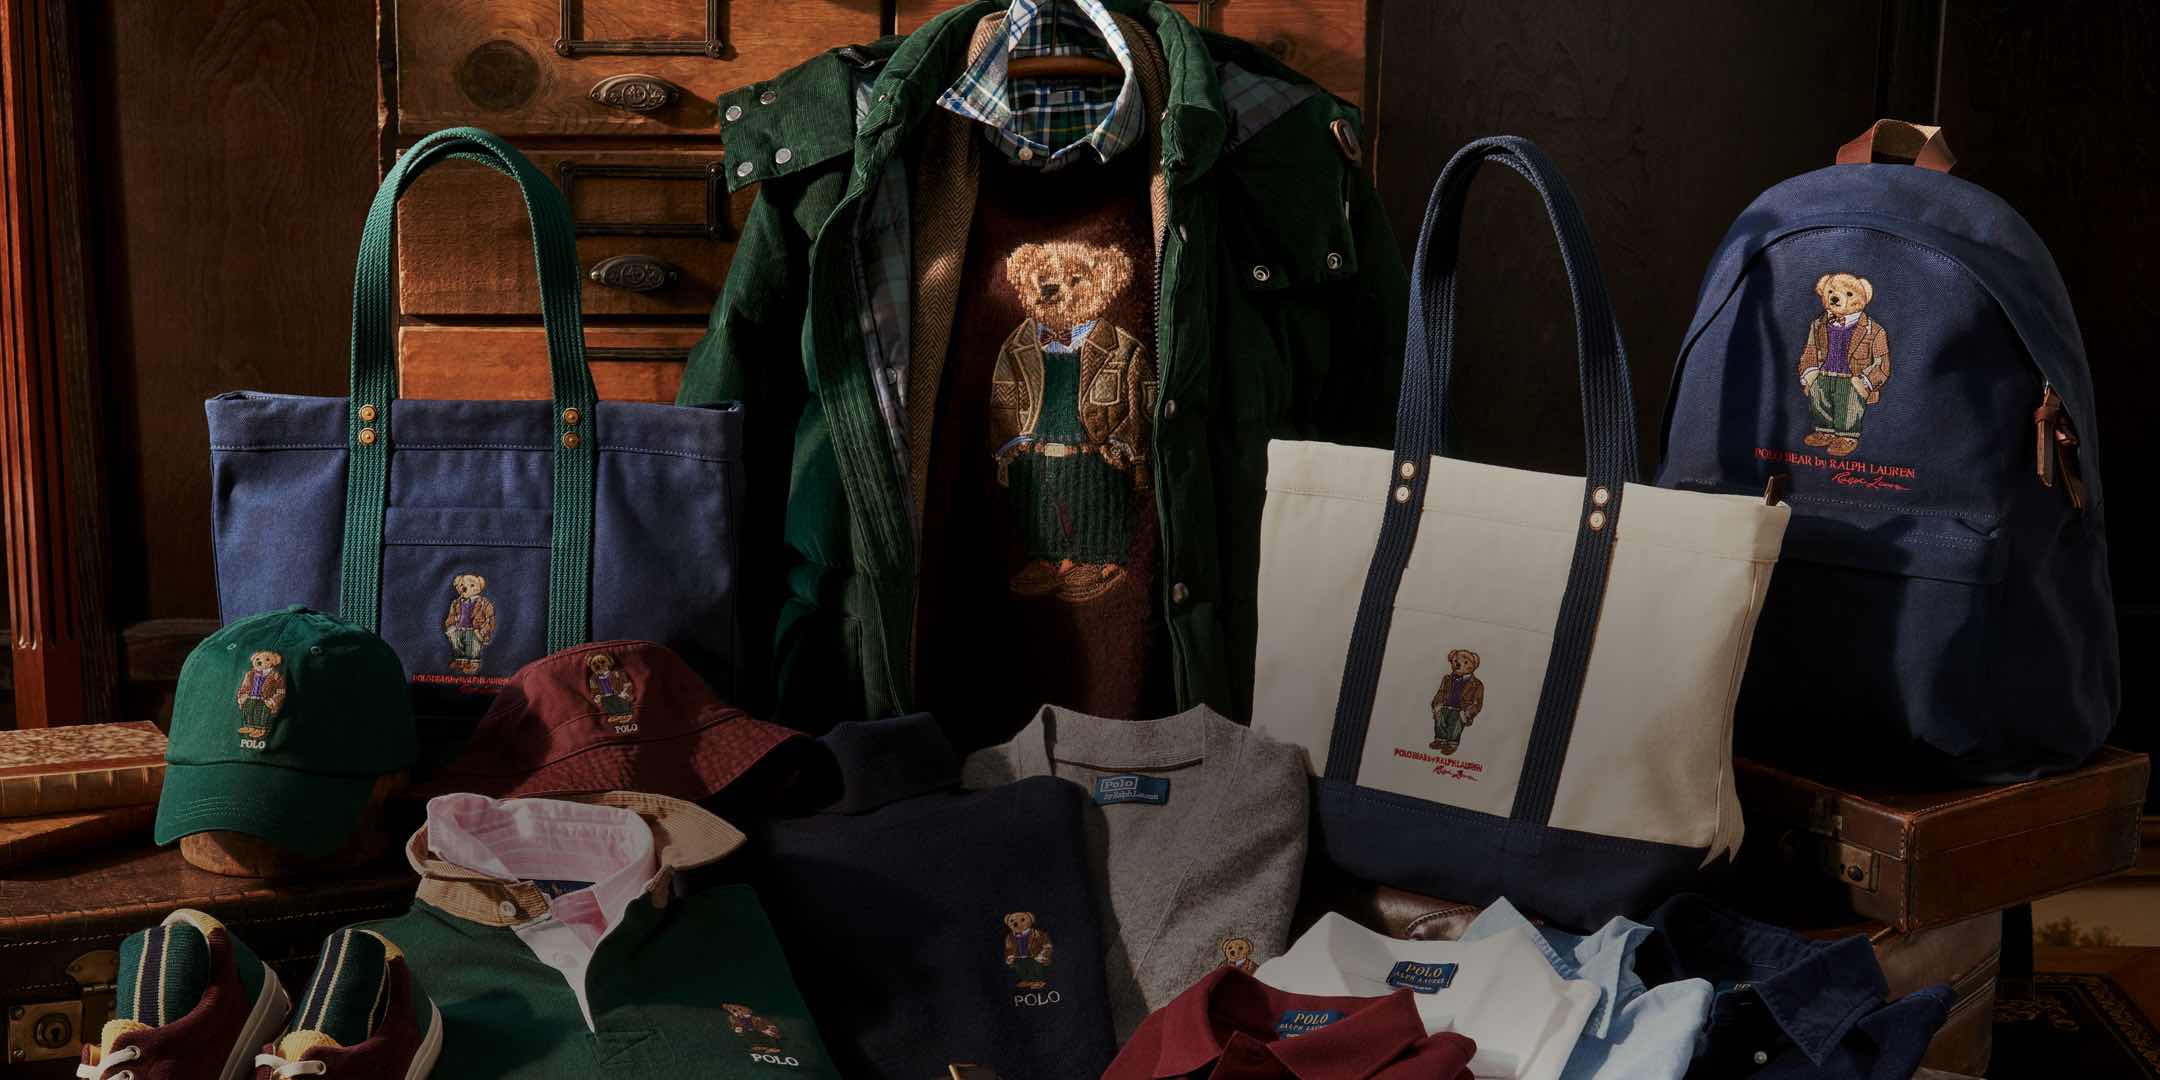 Apparel and accessories featuring the Polo Bear.